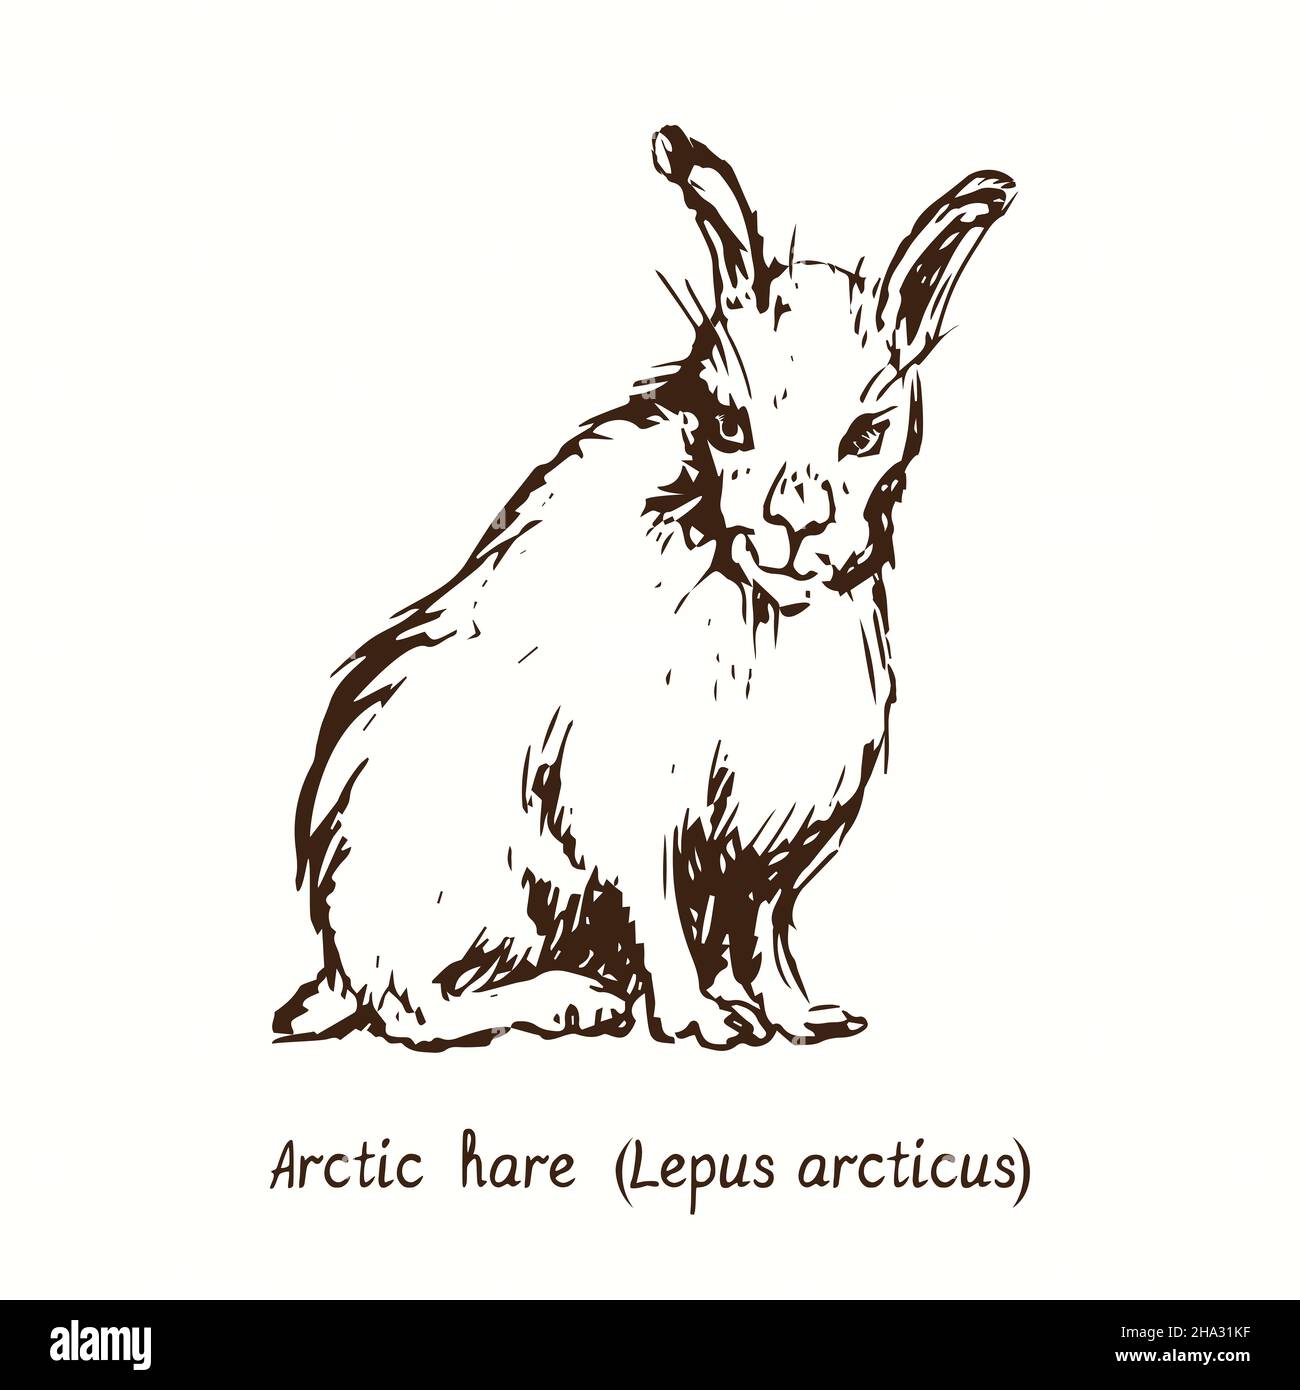 Arctic hare (Lepus arcticus) sitting side view. Ink black and white doodle drawing in woodcut style. Stock Photo